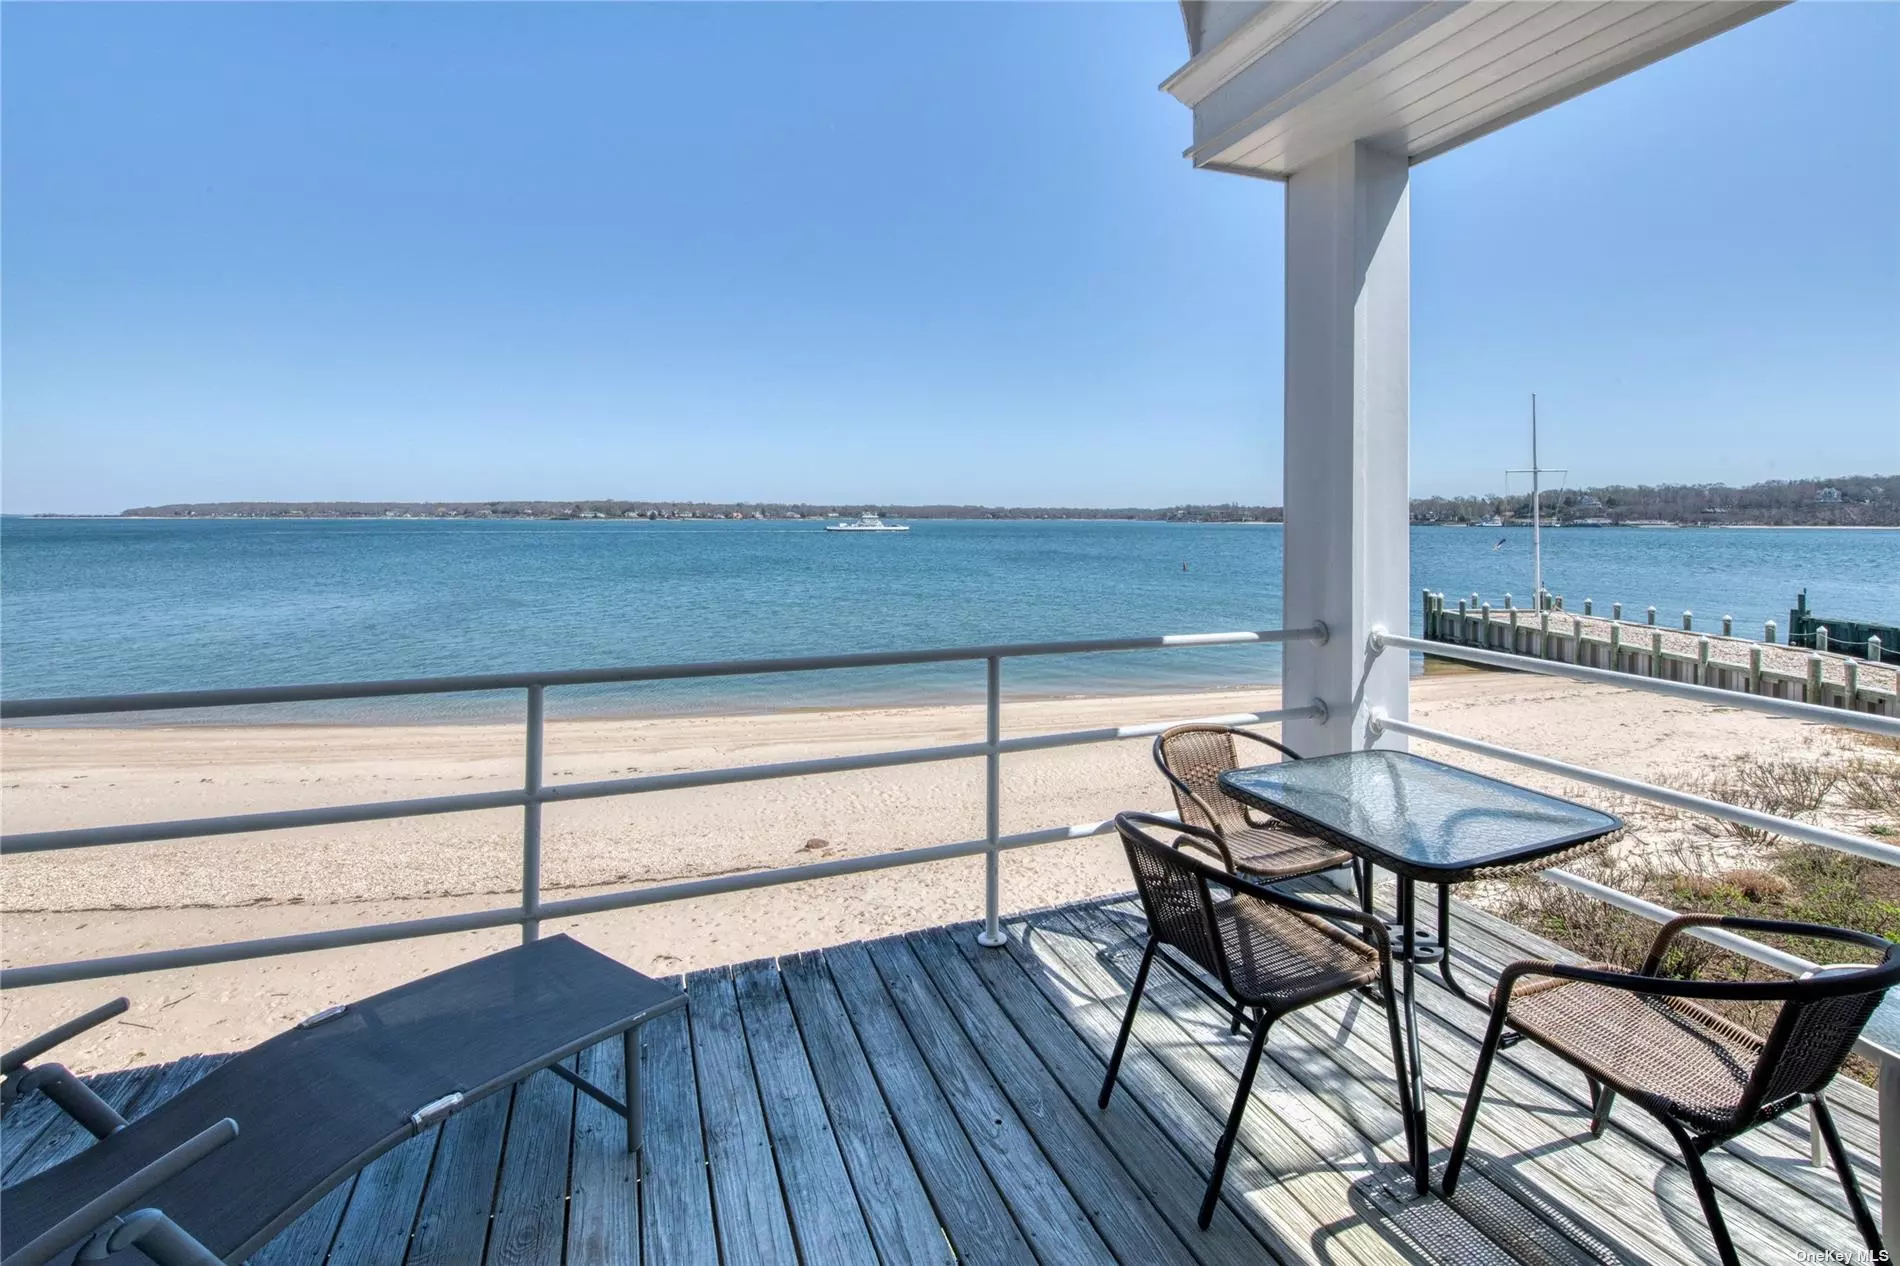 Newly Renovated Unit W/Spectacular Views Of Bay, Beach & SI Beyond. 2 Bed/ 2 Bath. Styled Elegantly. Open Plan W/ Views From Every Window. Waterfront Balcony On Beach. Complex has a Waterfront Pool, Tennis & Pickle Ball Court & Over 200 Ft of Bay Beach. Rental Includes a Boat Slip in Marina. In Heart Of Village. Close To Restaurants, Transportation, Ferry & Shops. (Greenport Rental Permit #24-059) Rented for Summer 2024.